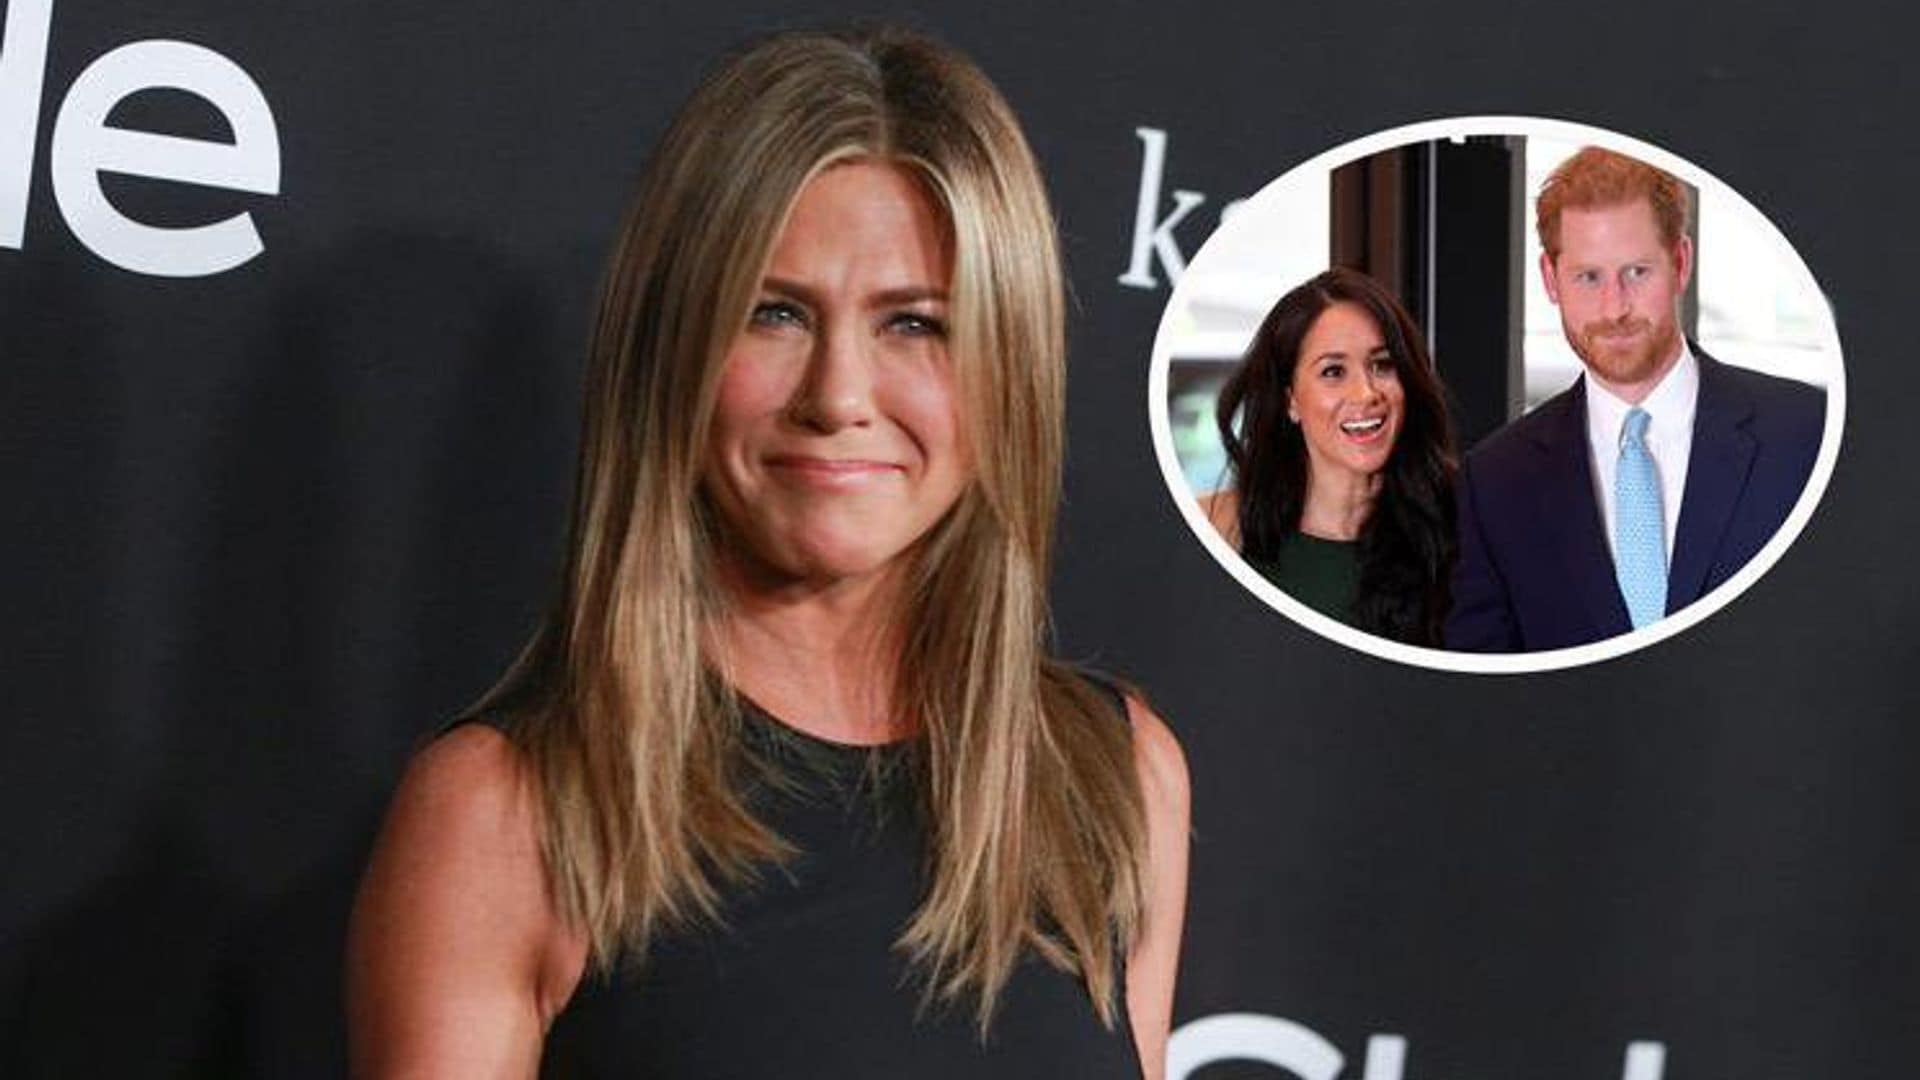 Jennifer Aniston beats out Meghan and Prince Harry on this world record